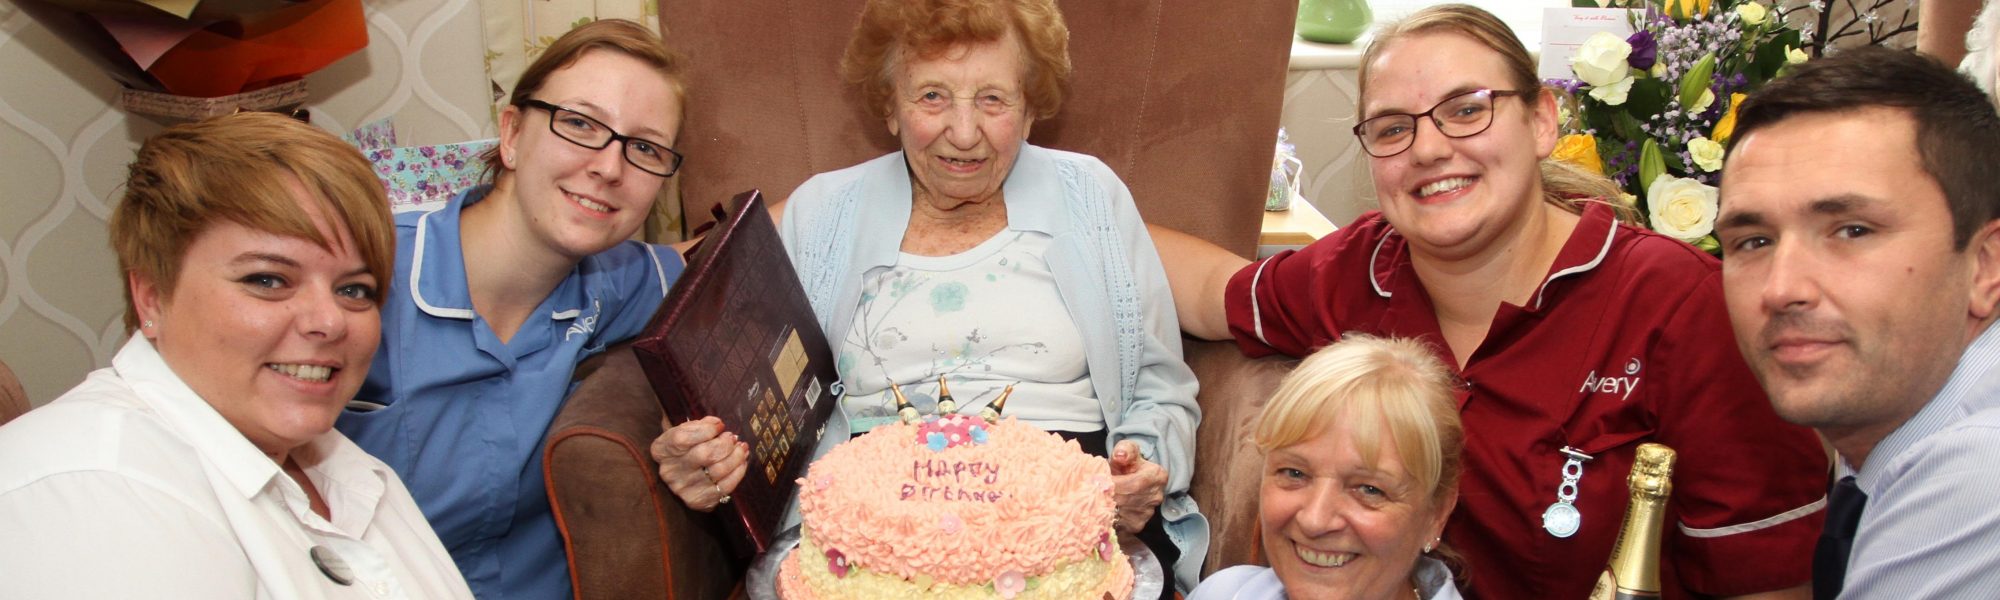 hinckley-house-care-home-veras-birthday-celebration-104-years-young